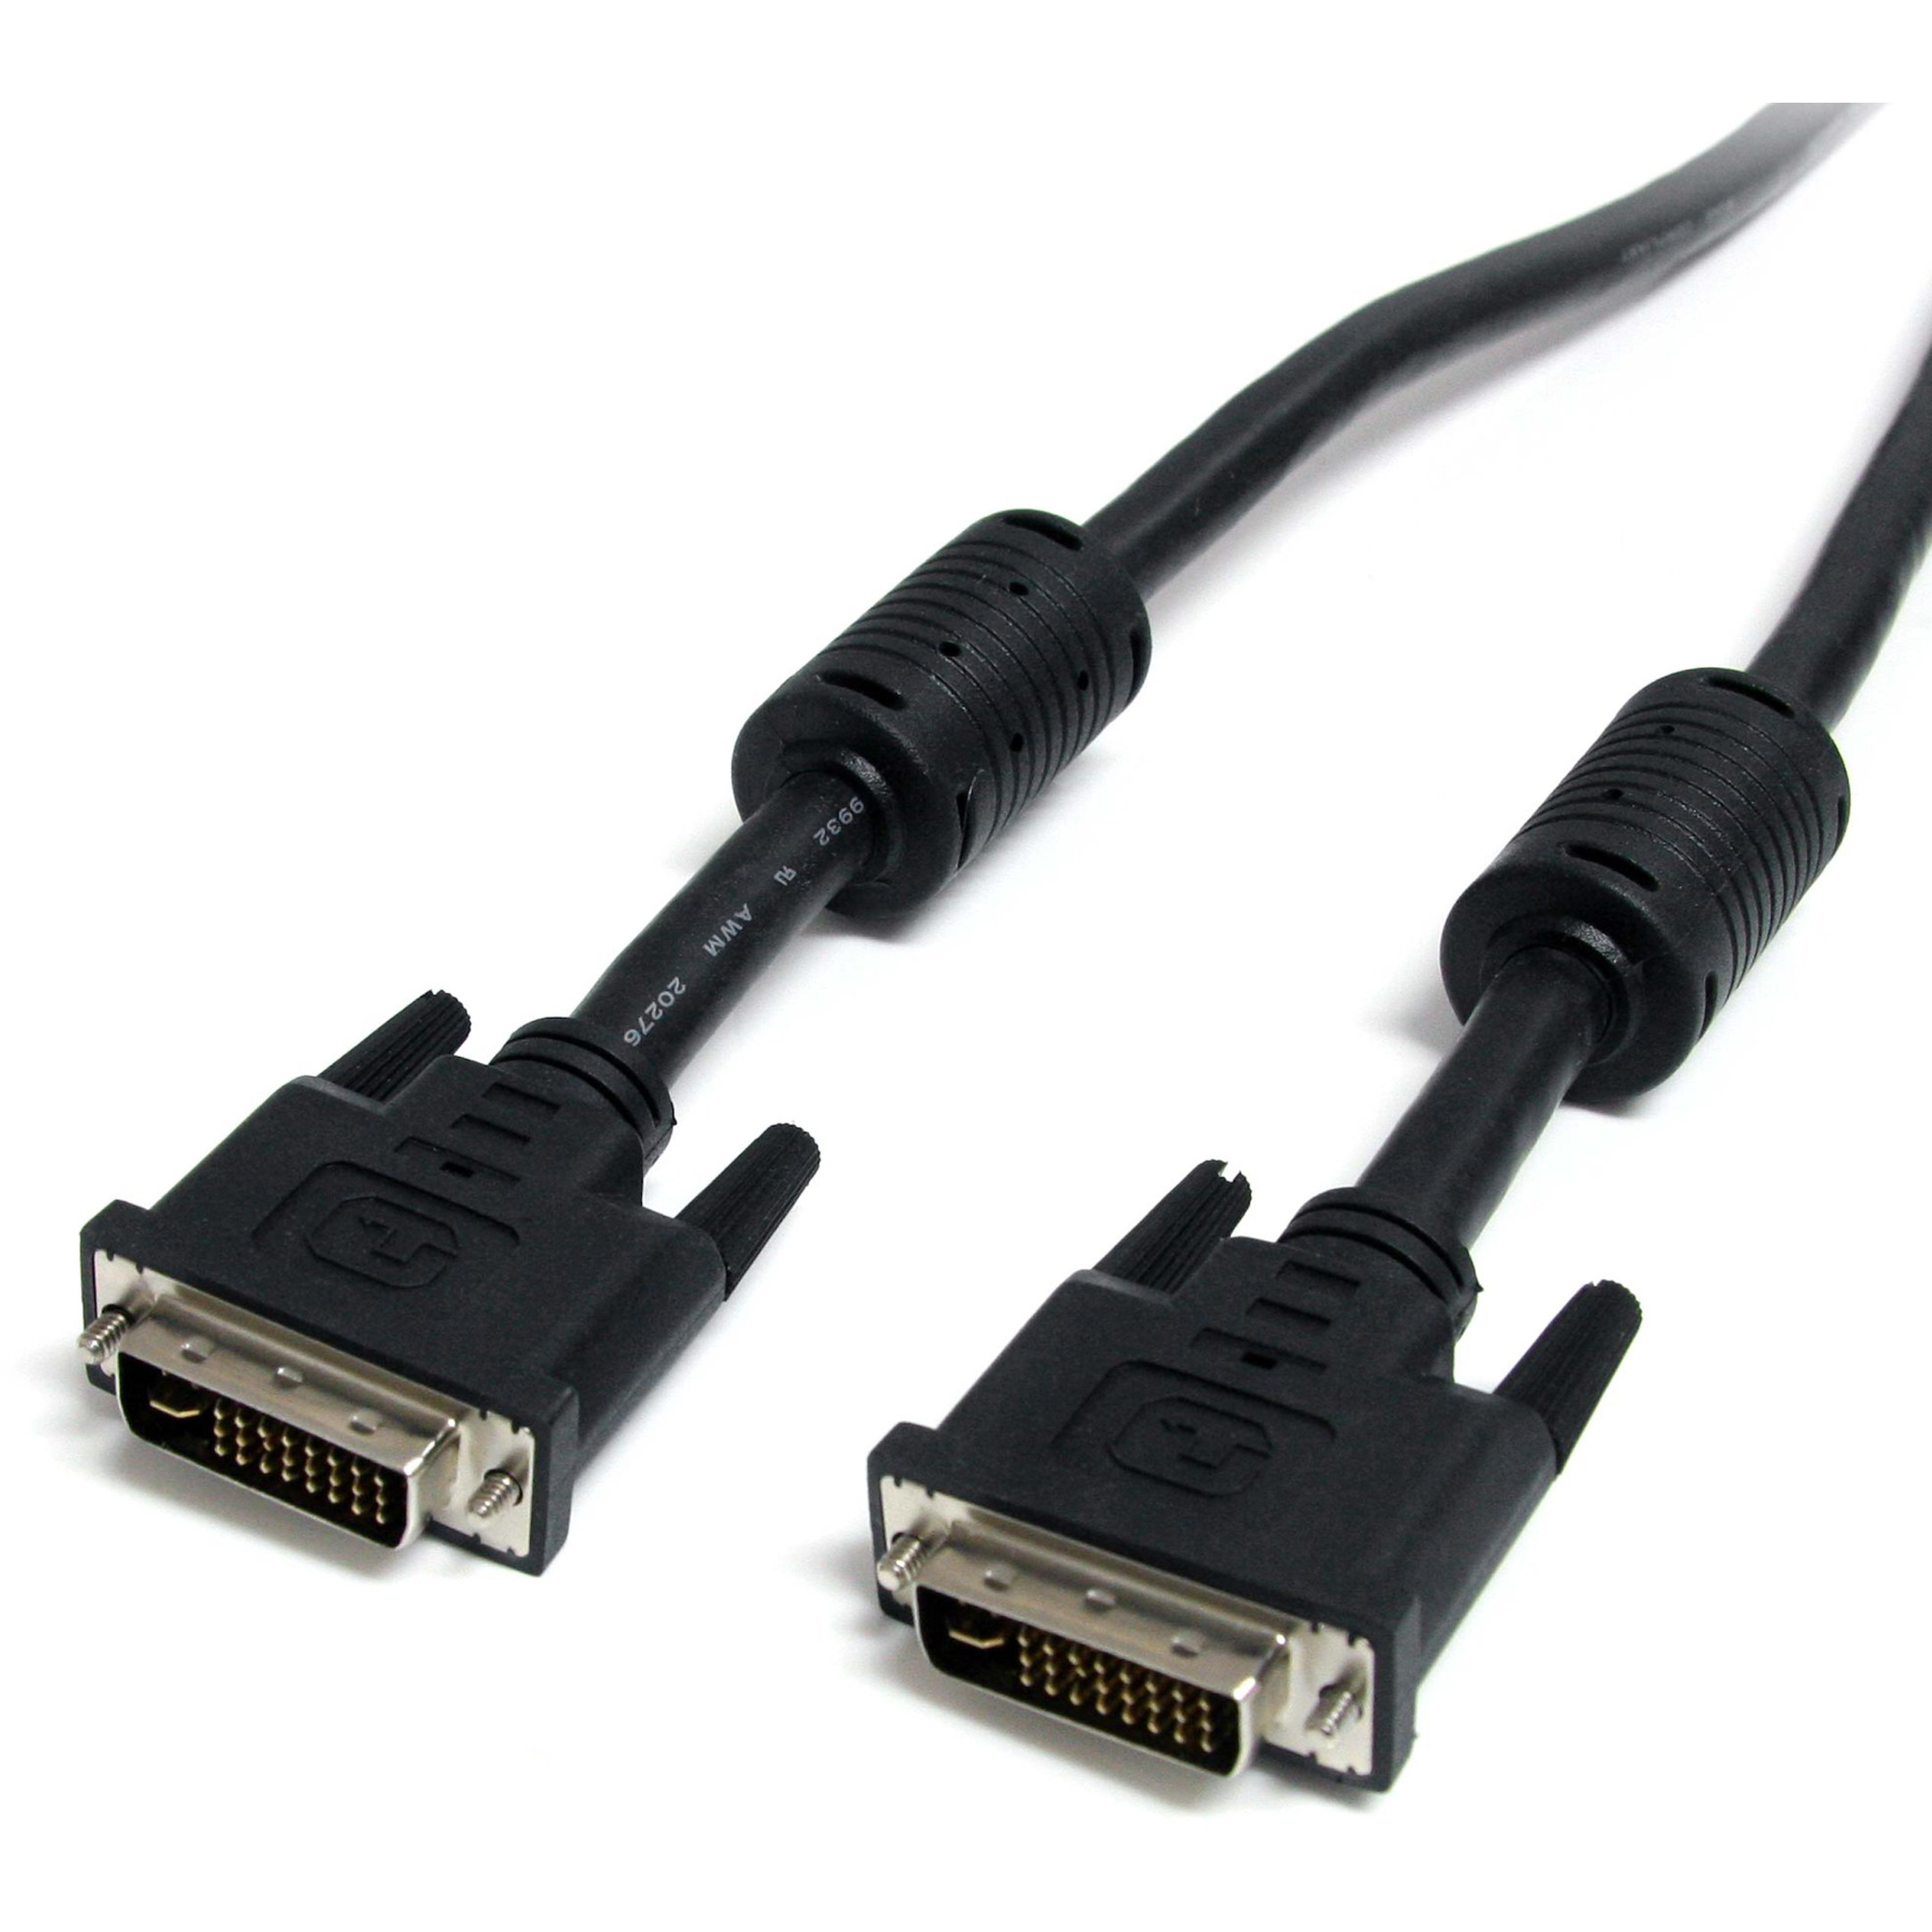 Startech .com 6 ft DVI-I Dual Link Digital Analog Monitor Cable M/MProvides a high speed, crystal clear connection between your DVI devices -… DVIIDMM6